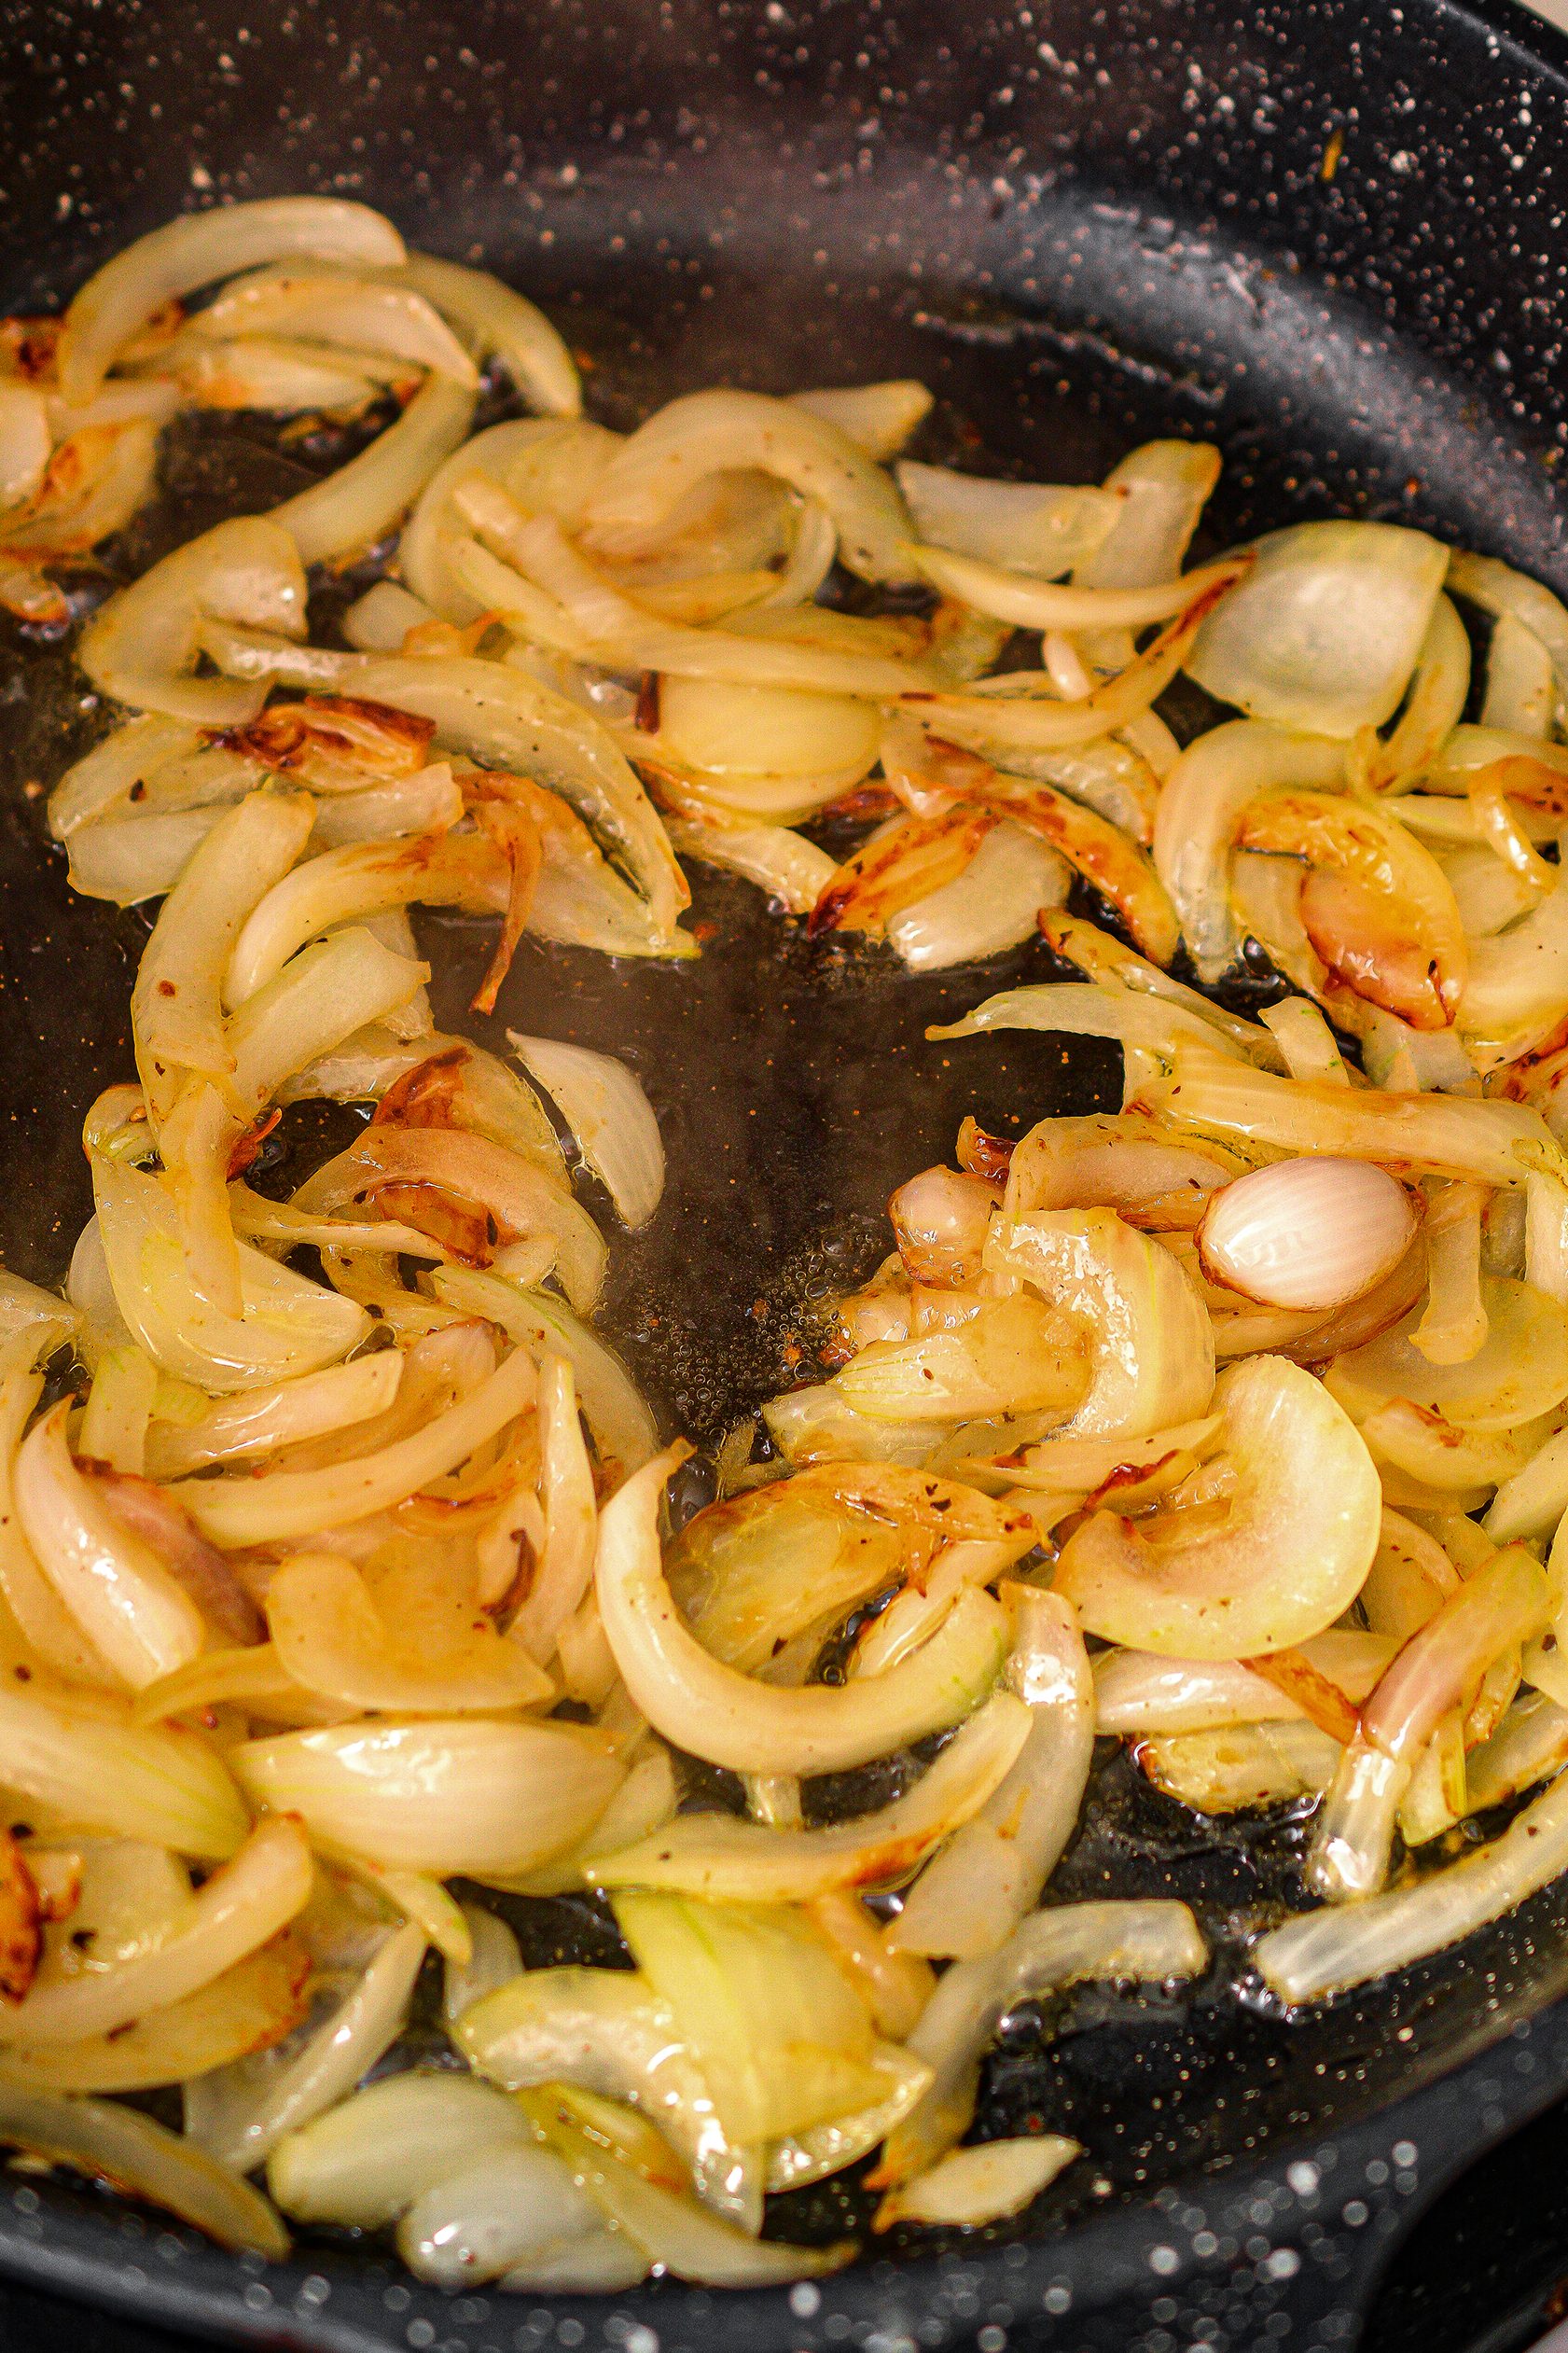 Over medium heat on the stove, melt the butter and add the onions. Saute until the onions are softened.